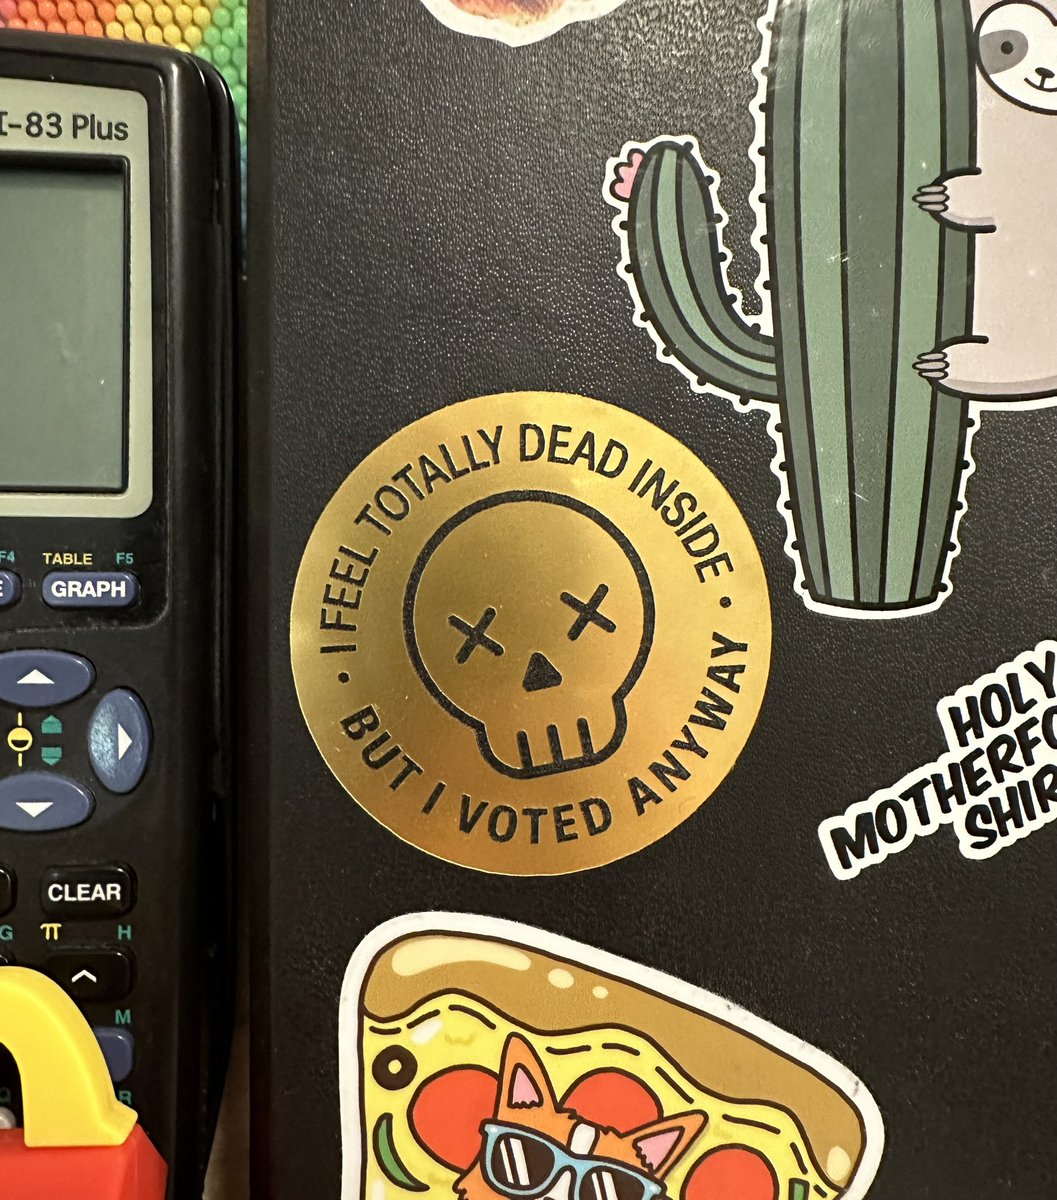 round metallic sticker with a skull that says “I feel totally dead inside but I voted anyway”